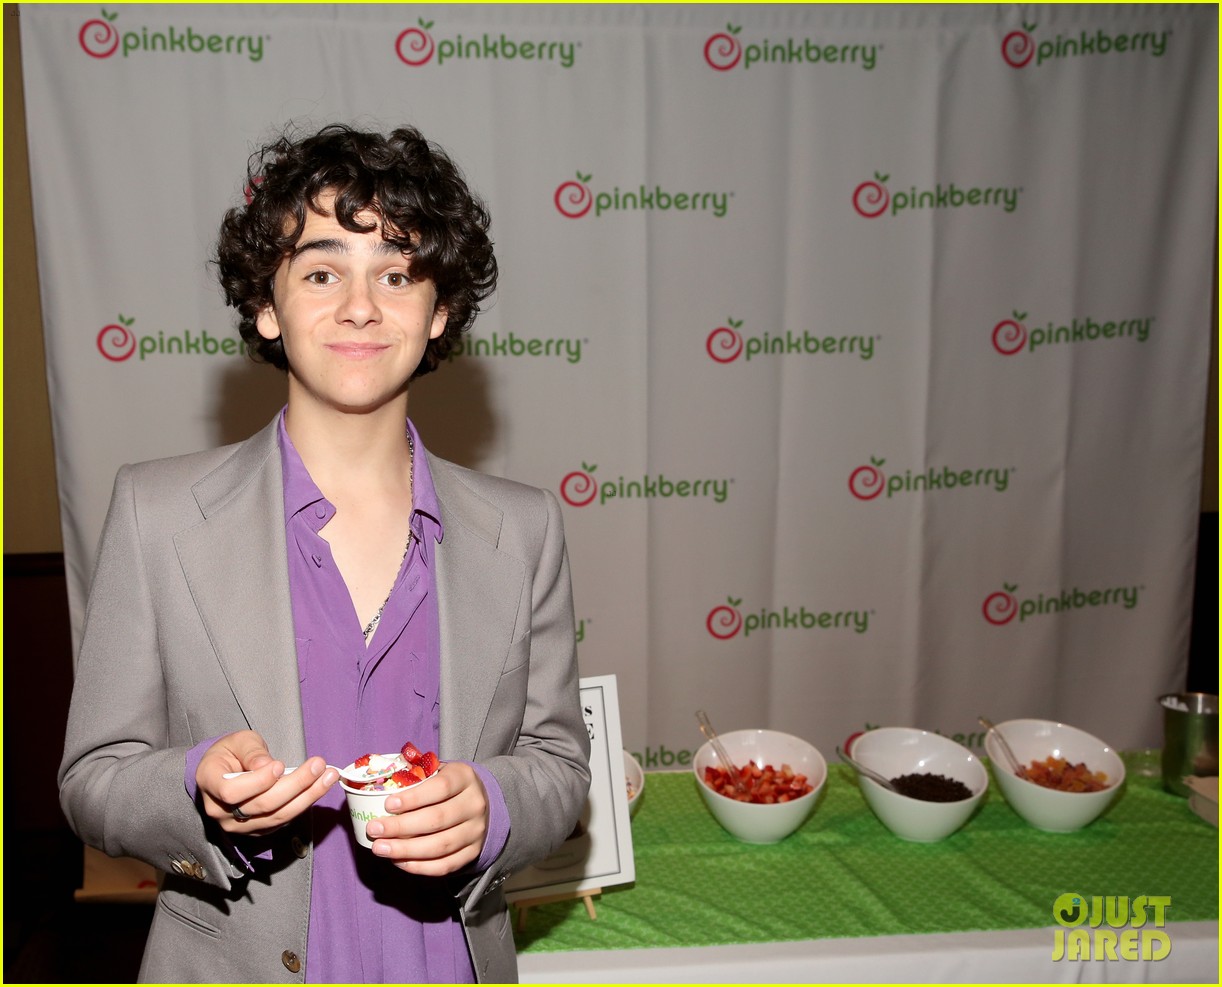 asher angel and jack dylan grazer bring shazam to kcas 2019 09